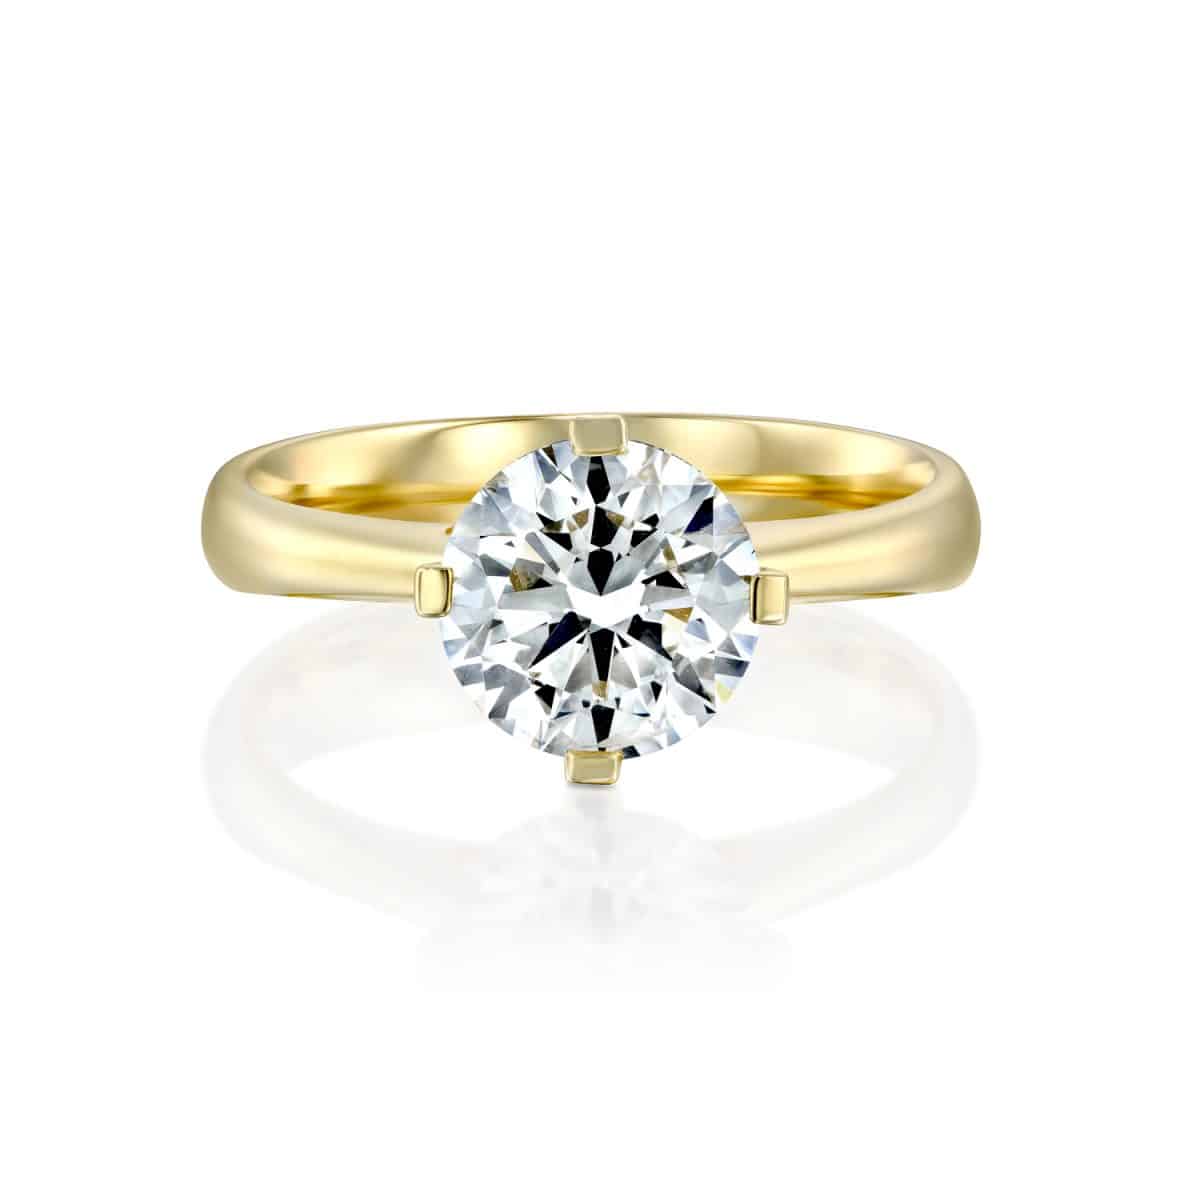 "Mary" - Yellow Gold Lab Grown Diamond Engagement Ring 2.01ct. - laying